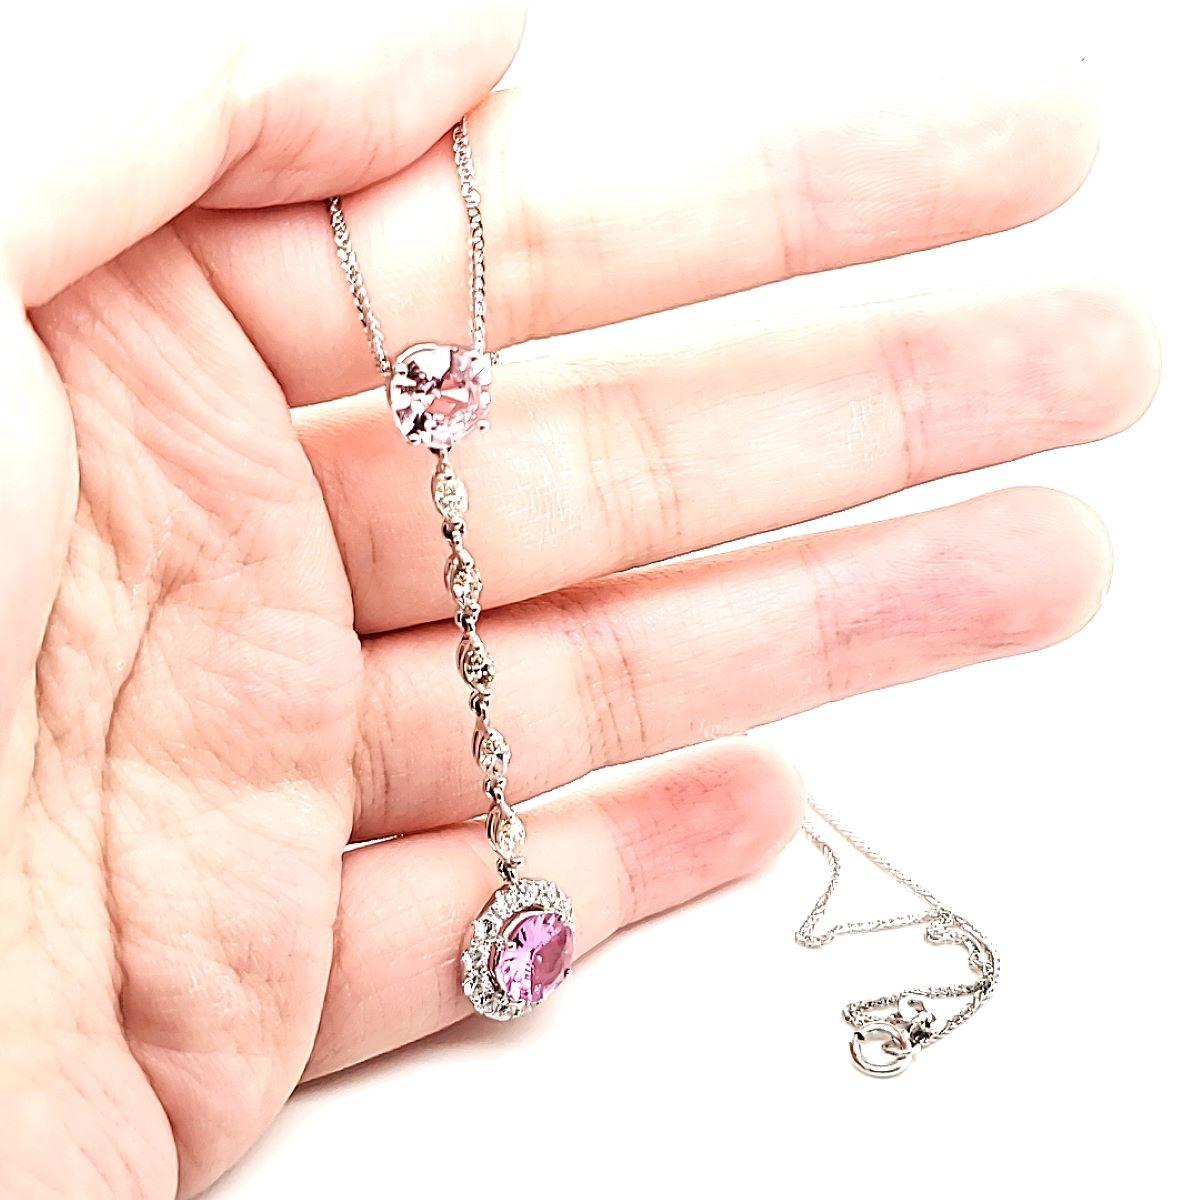 Pink Sapphire Cts 2.44 and Marquise Diamond Cts 0.42 Drop Pendant Necklace For Sale 3